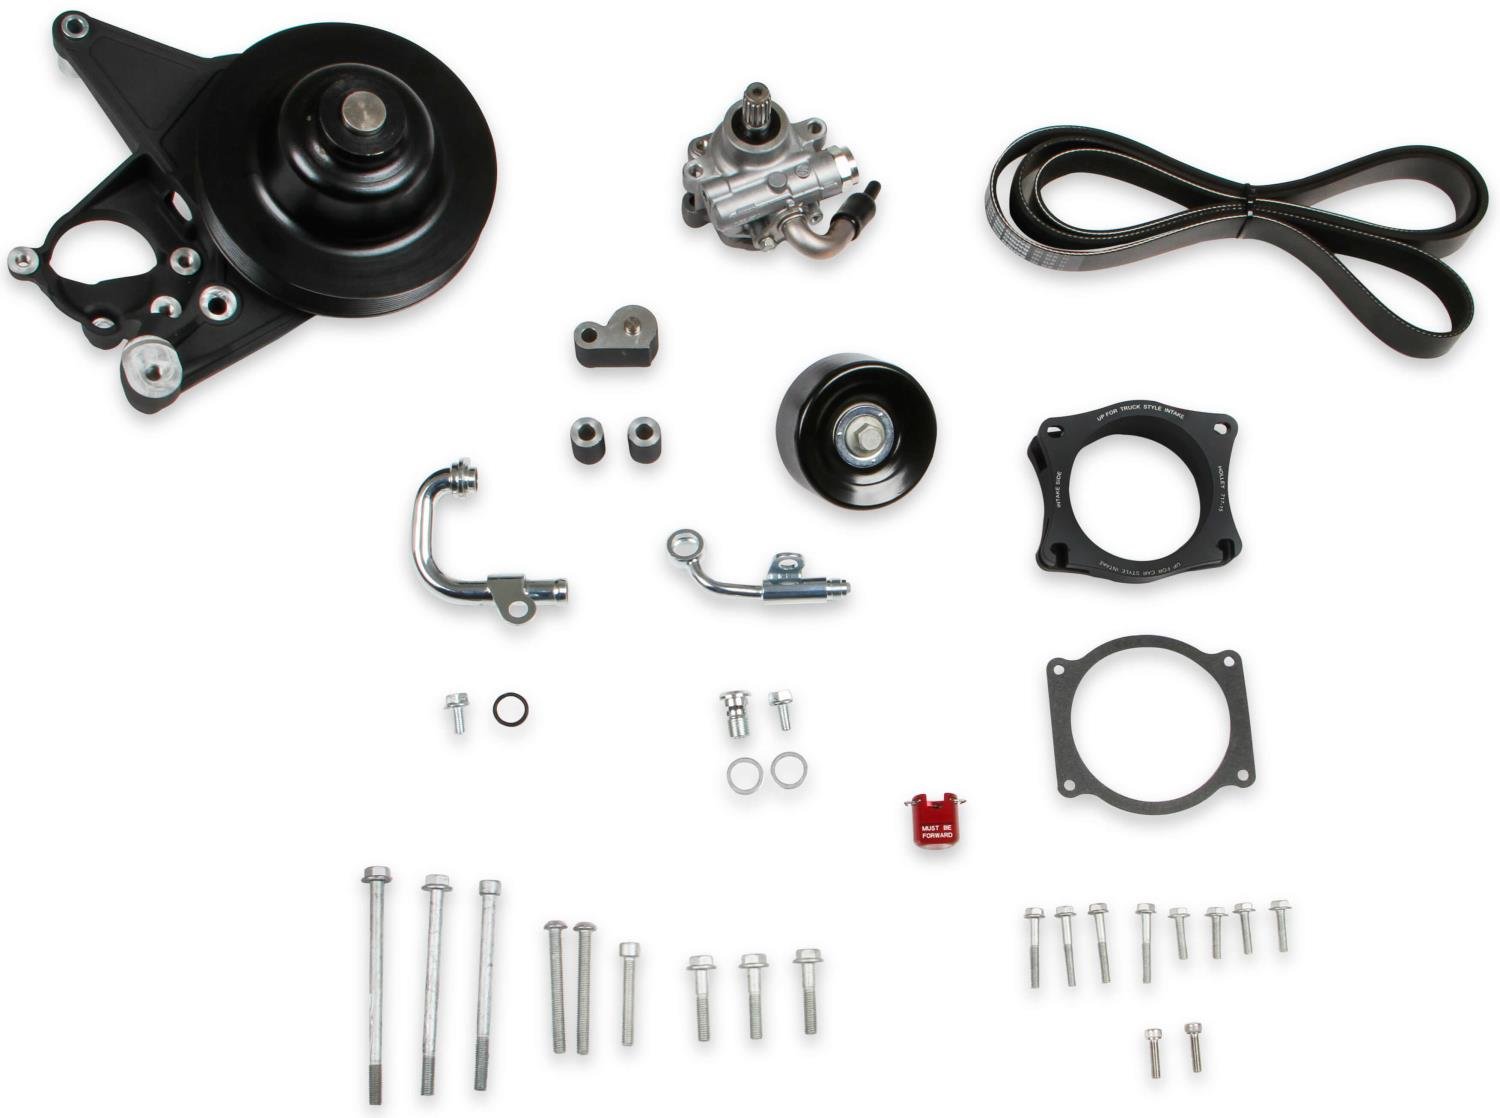 Retro-Fit Hydraulic Power Steering Kit for GM Gen V LT4 Engines